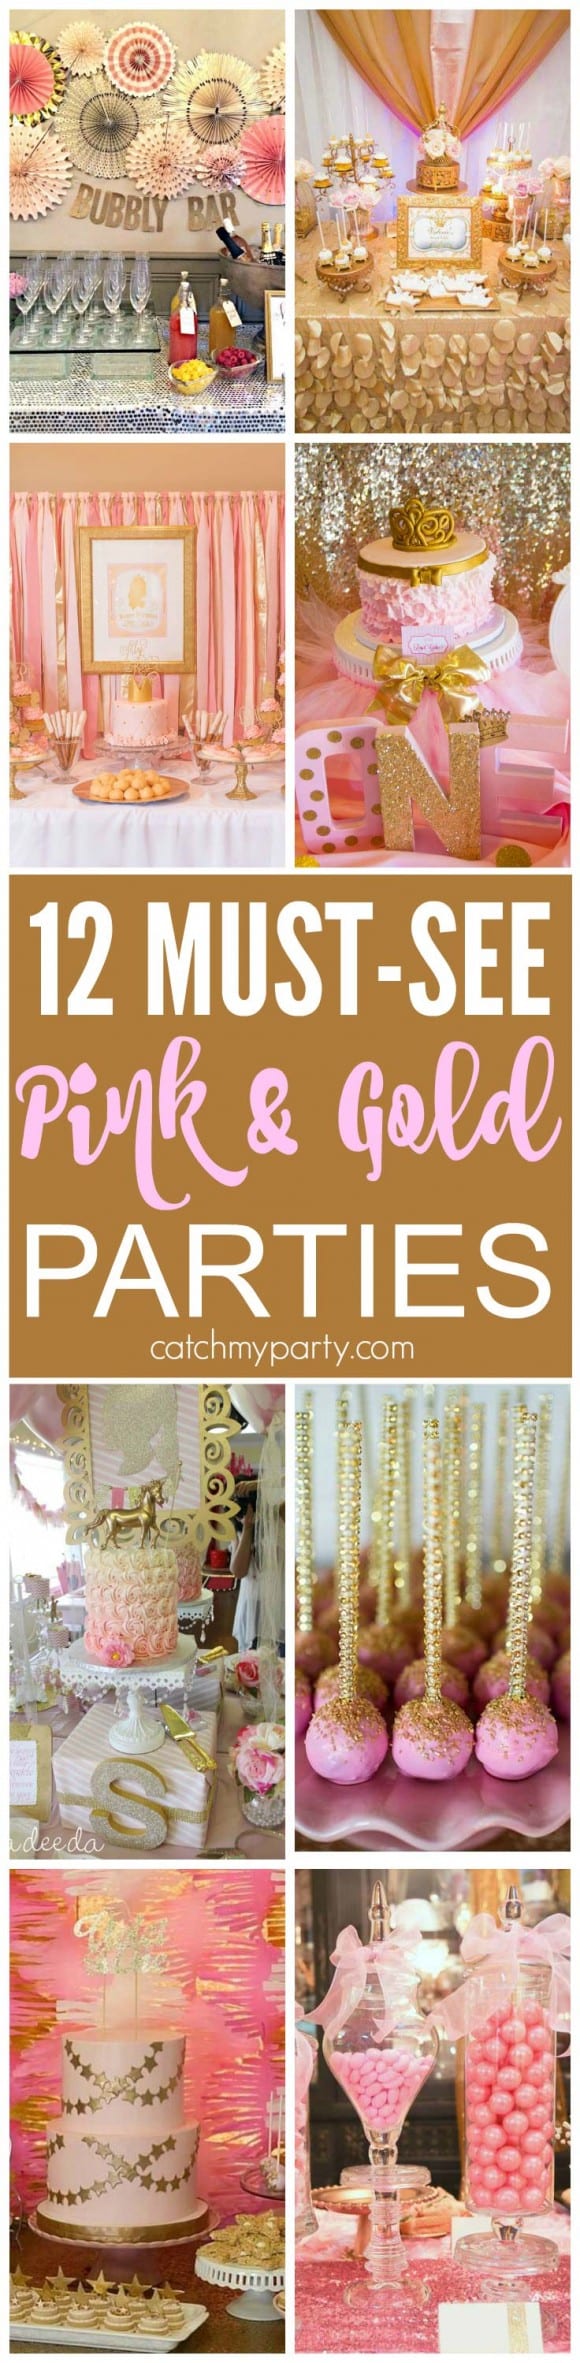 12 Must-See Pink and Gold Birthday Parties! There are ideas for bridal showers, baby showers, 1st birthdays and more! | CatchMyParty.com